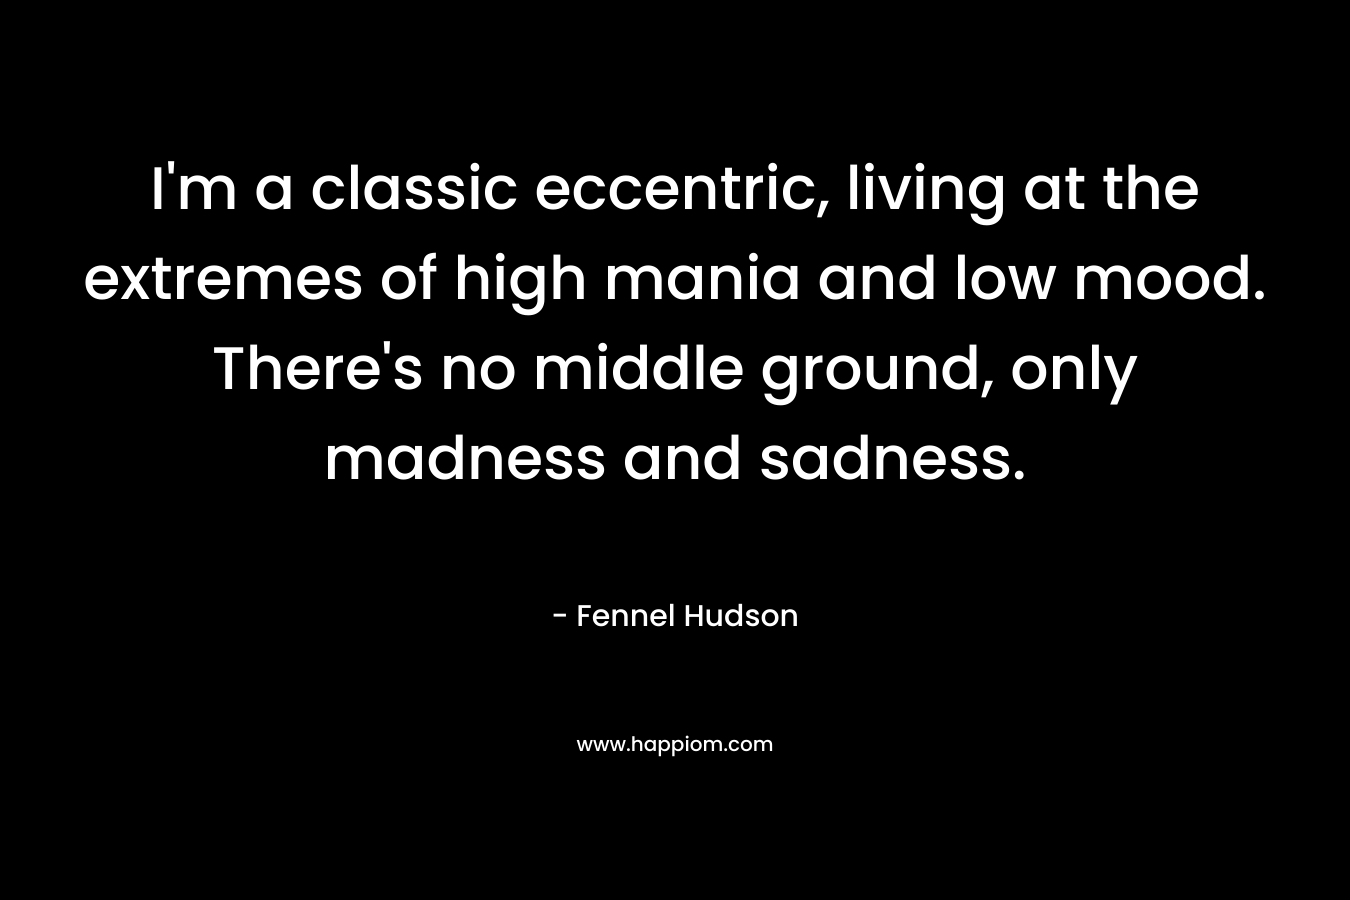 I’m a classic eccentric, living at the extremes of high mania and low mood. There’s no middle ground, only madness and sadness. – Fennel Hudson